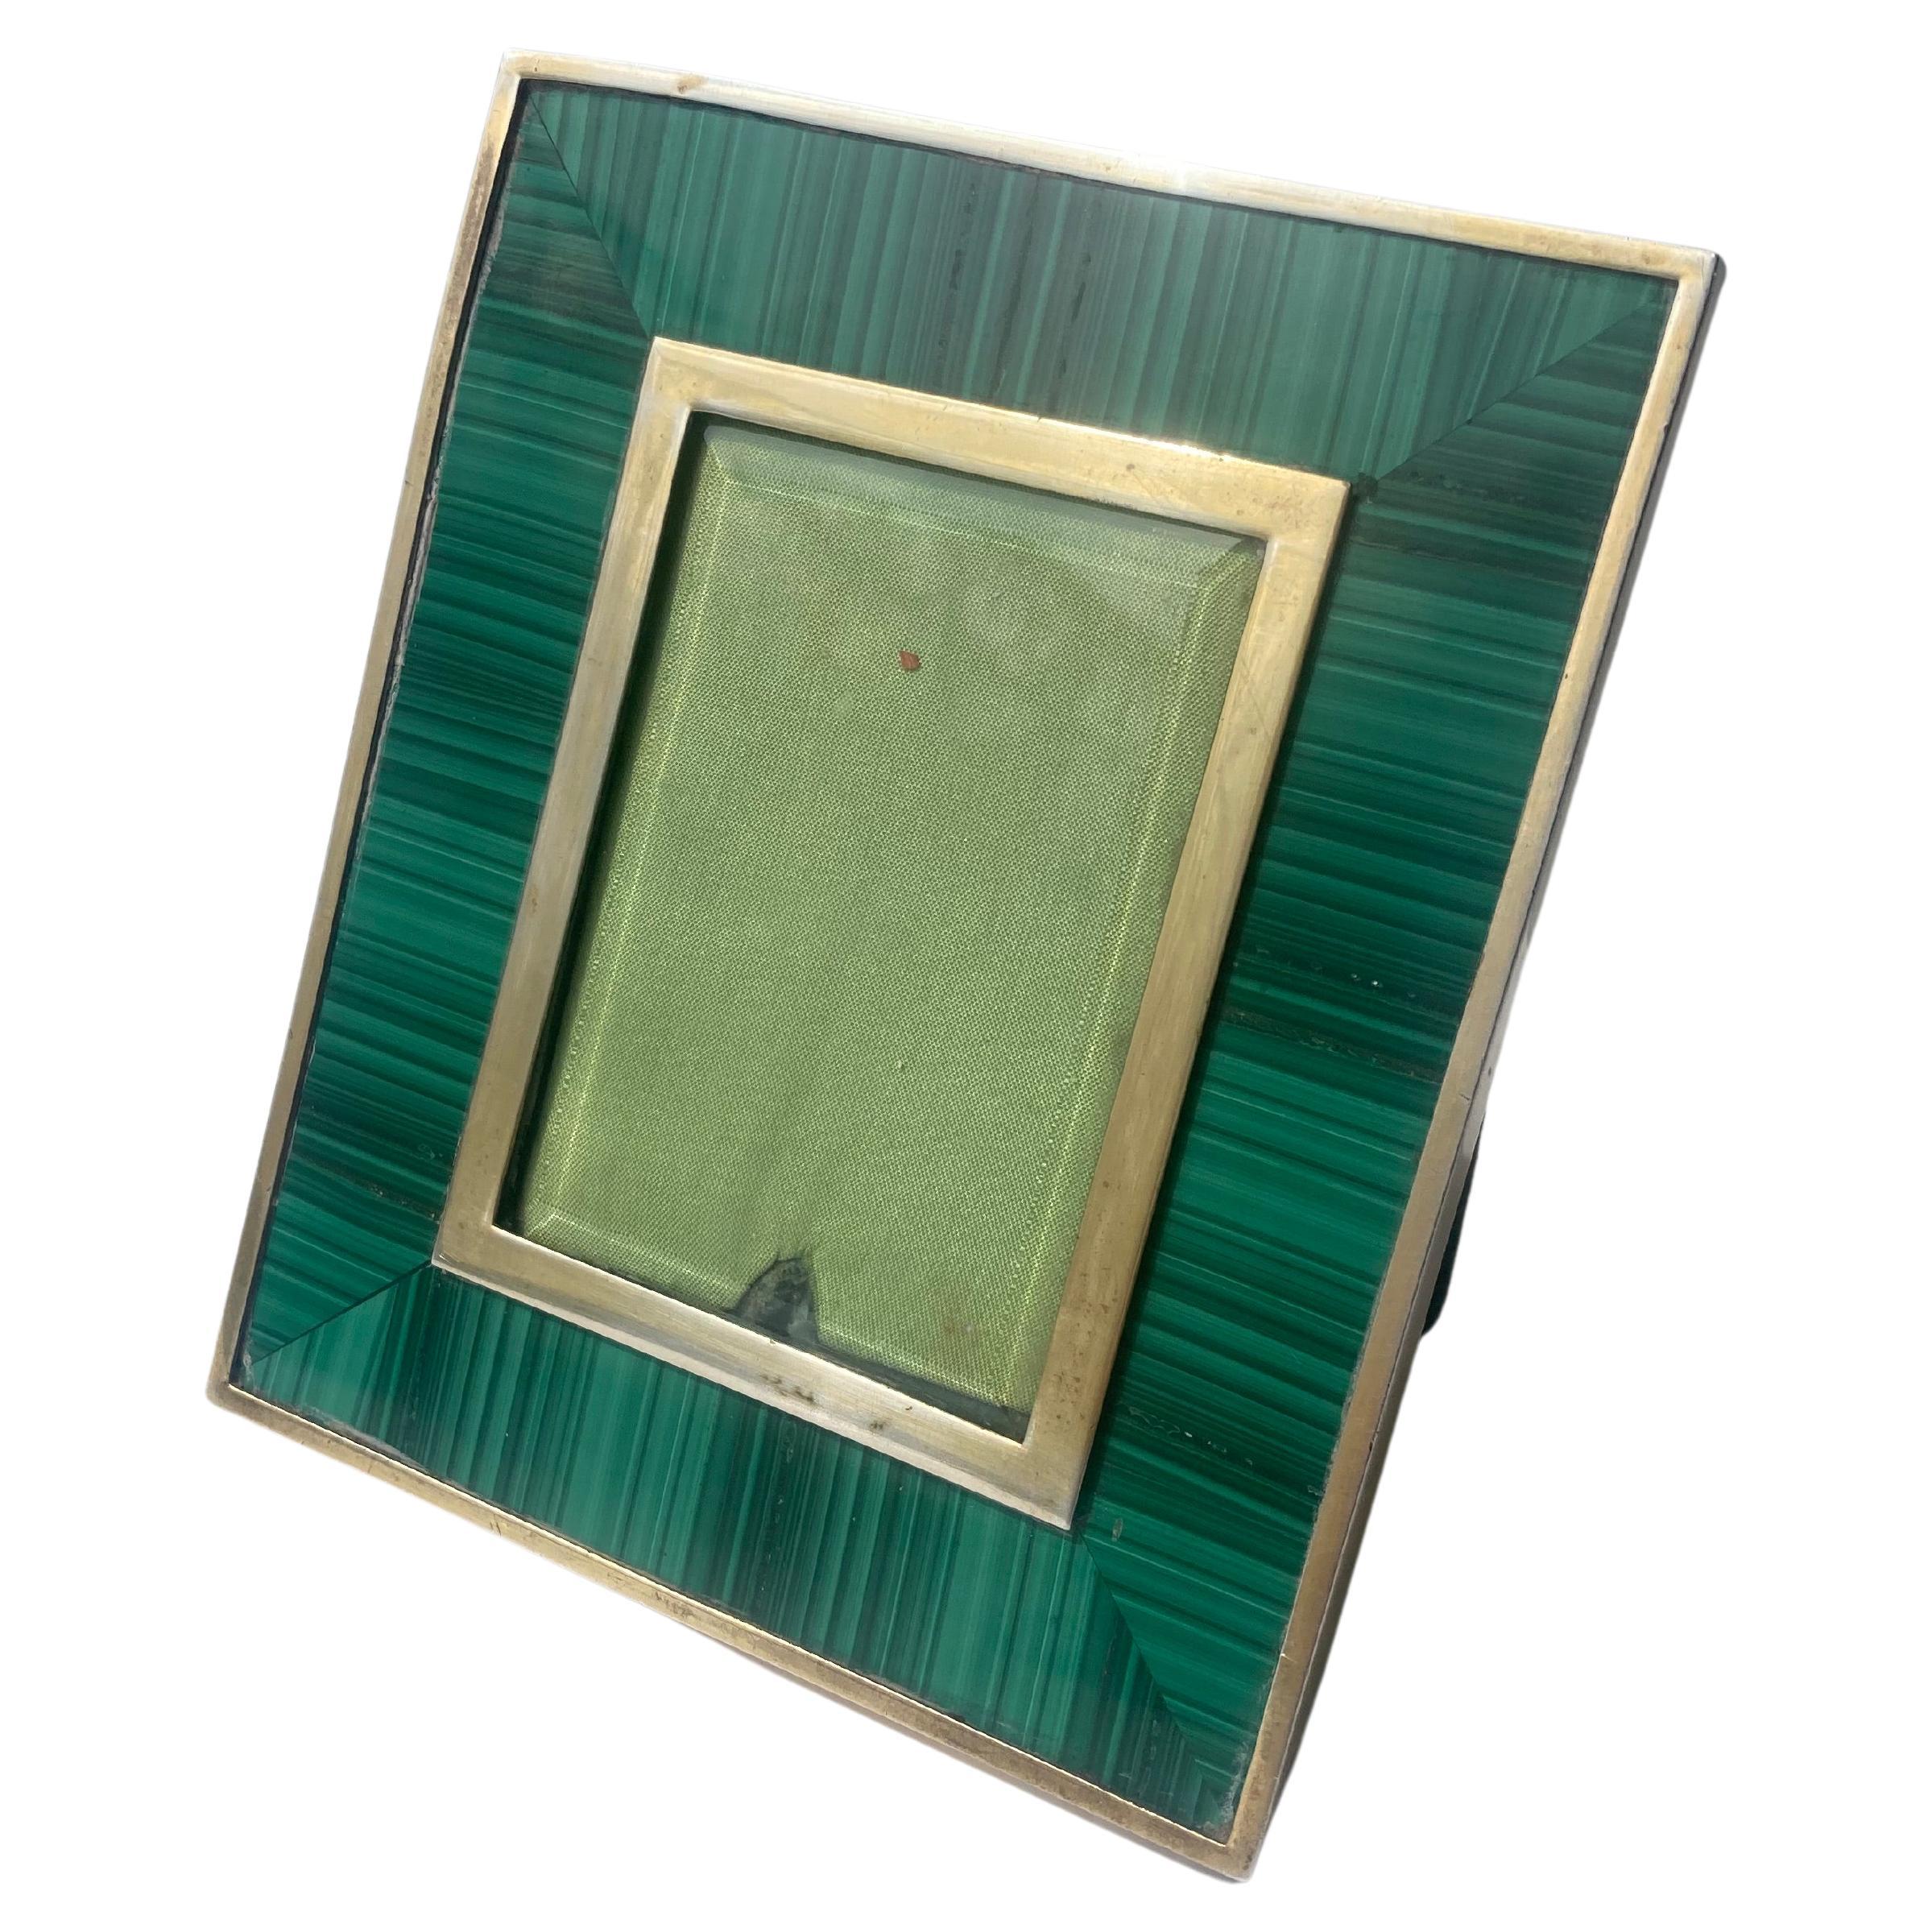 Salimbeni  Luxe sterling silver,  gilt and Malachite  picture frame Italy . For Sale